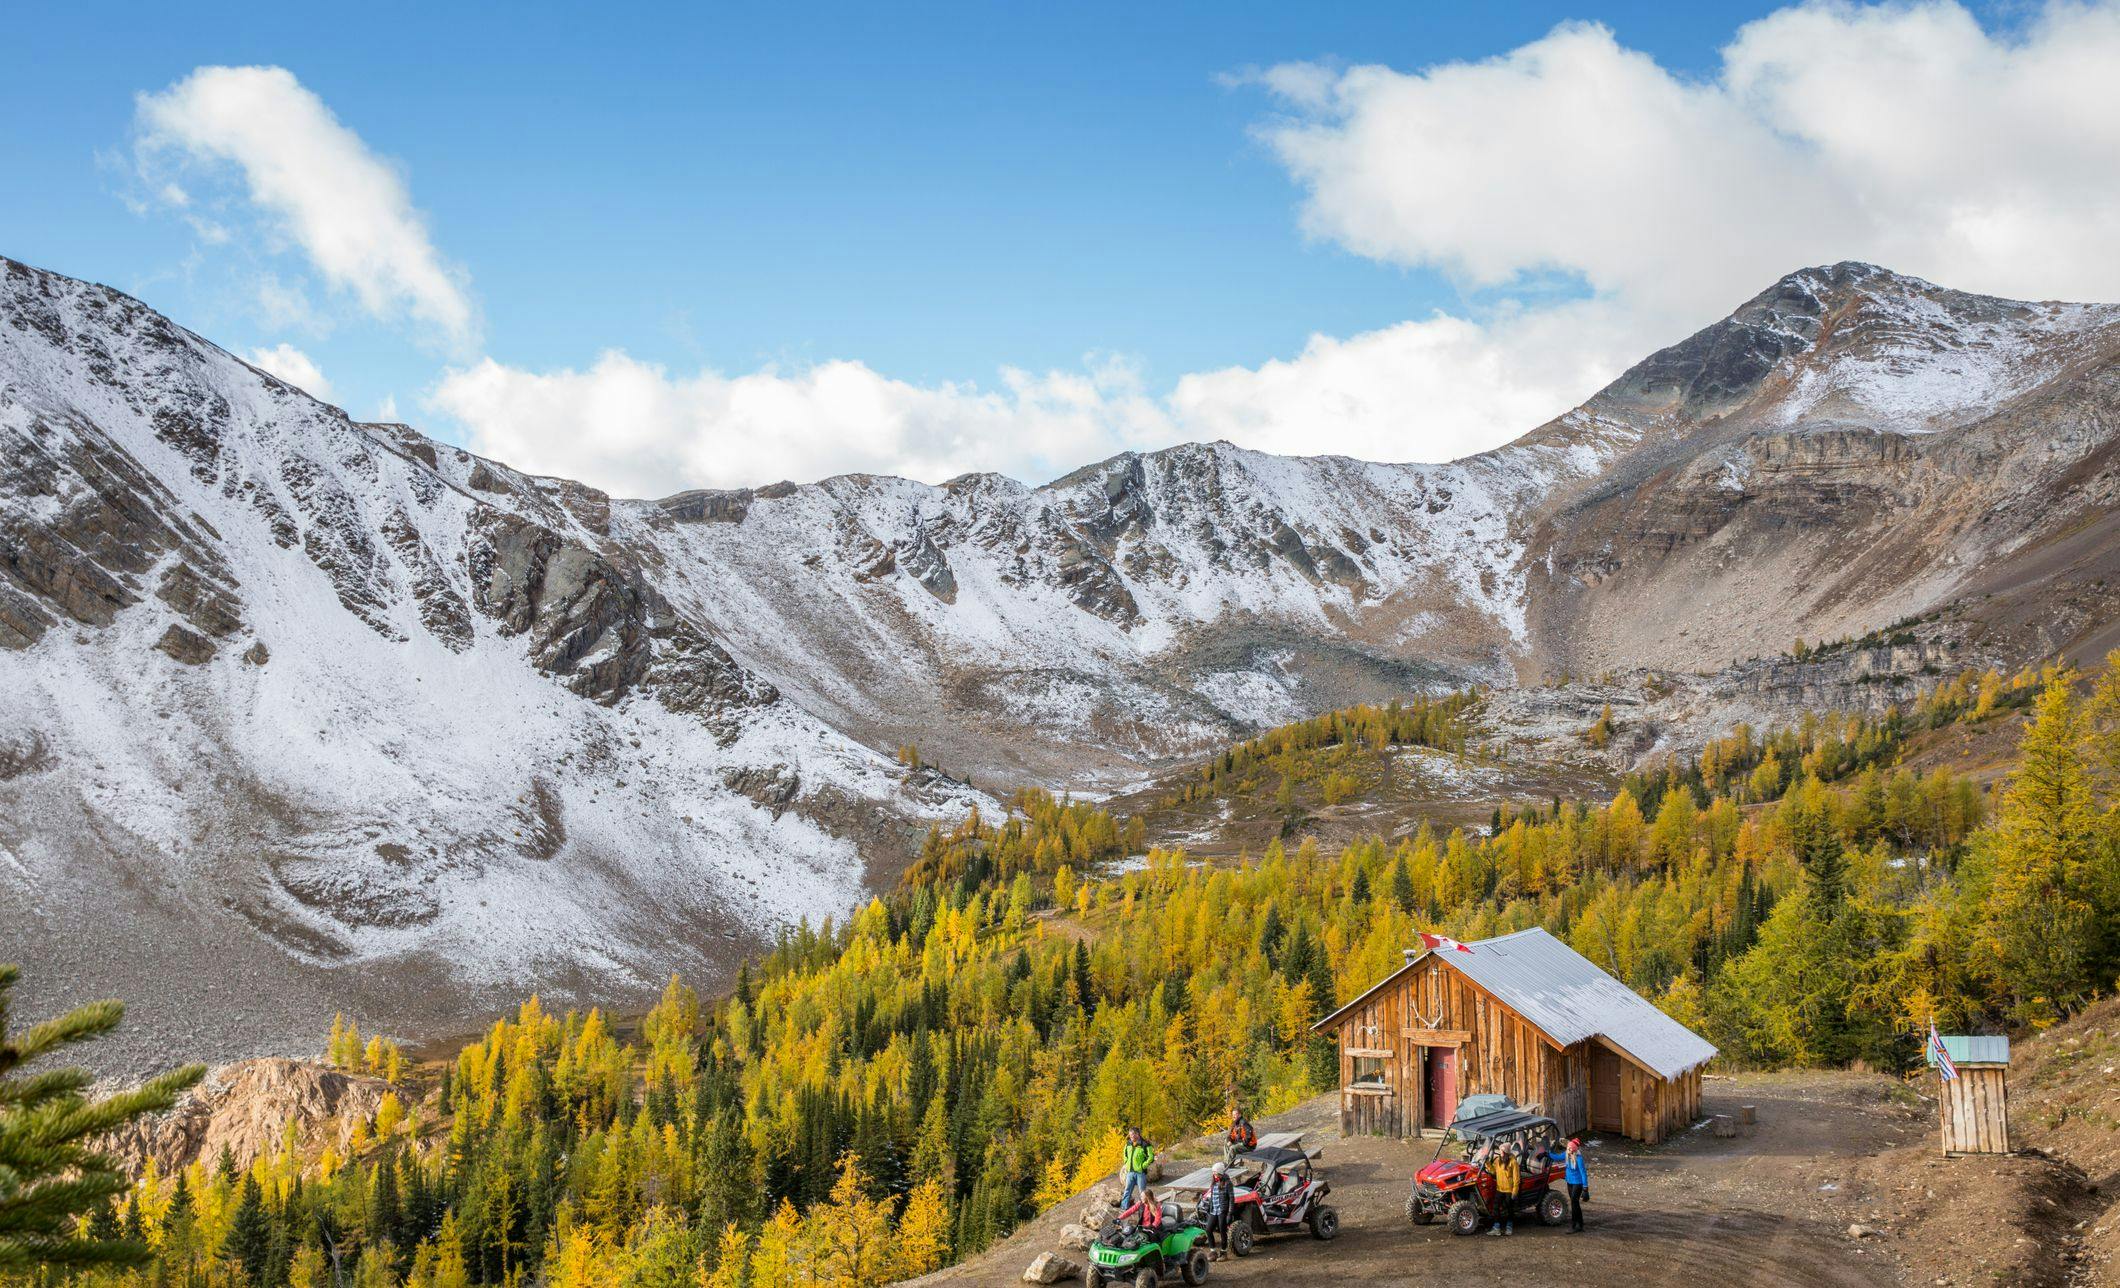 ATVs are parked next to a wooden cabin and surrounded by snow capped mountains and lush yellow and green trees